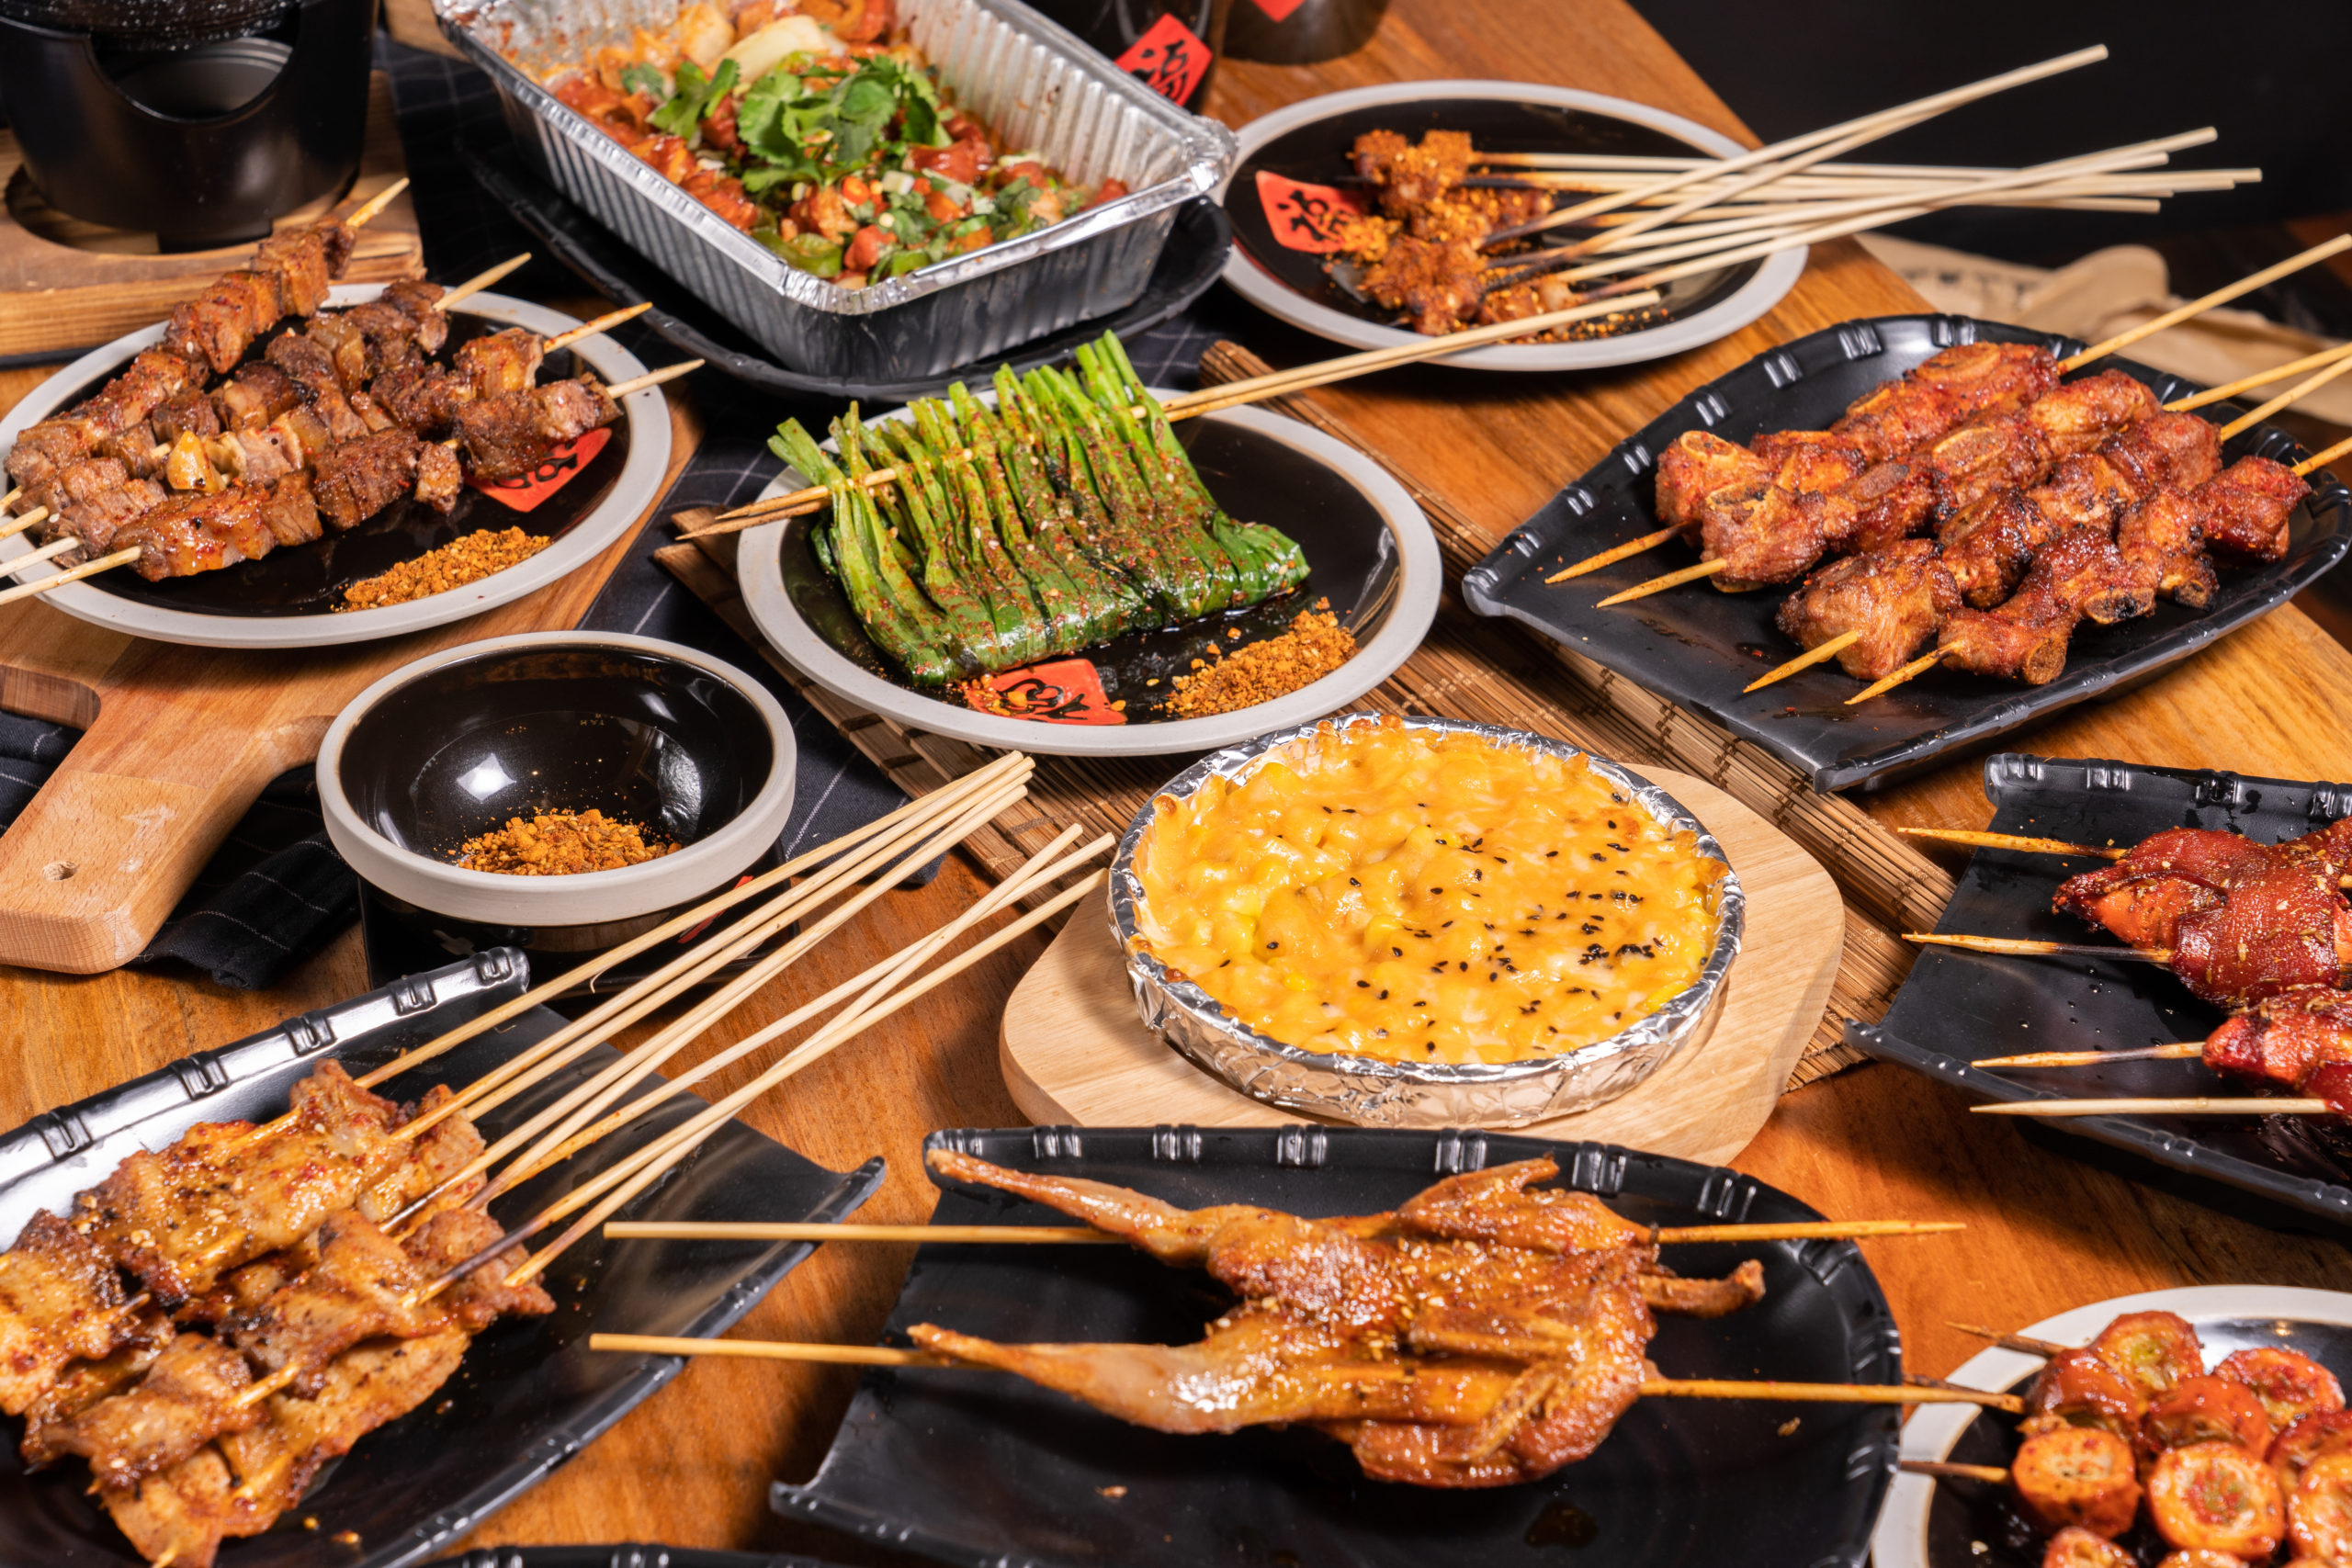 A table full of plates of various skewers, including meat, shrimp, and vegetables